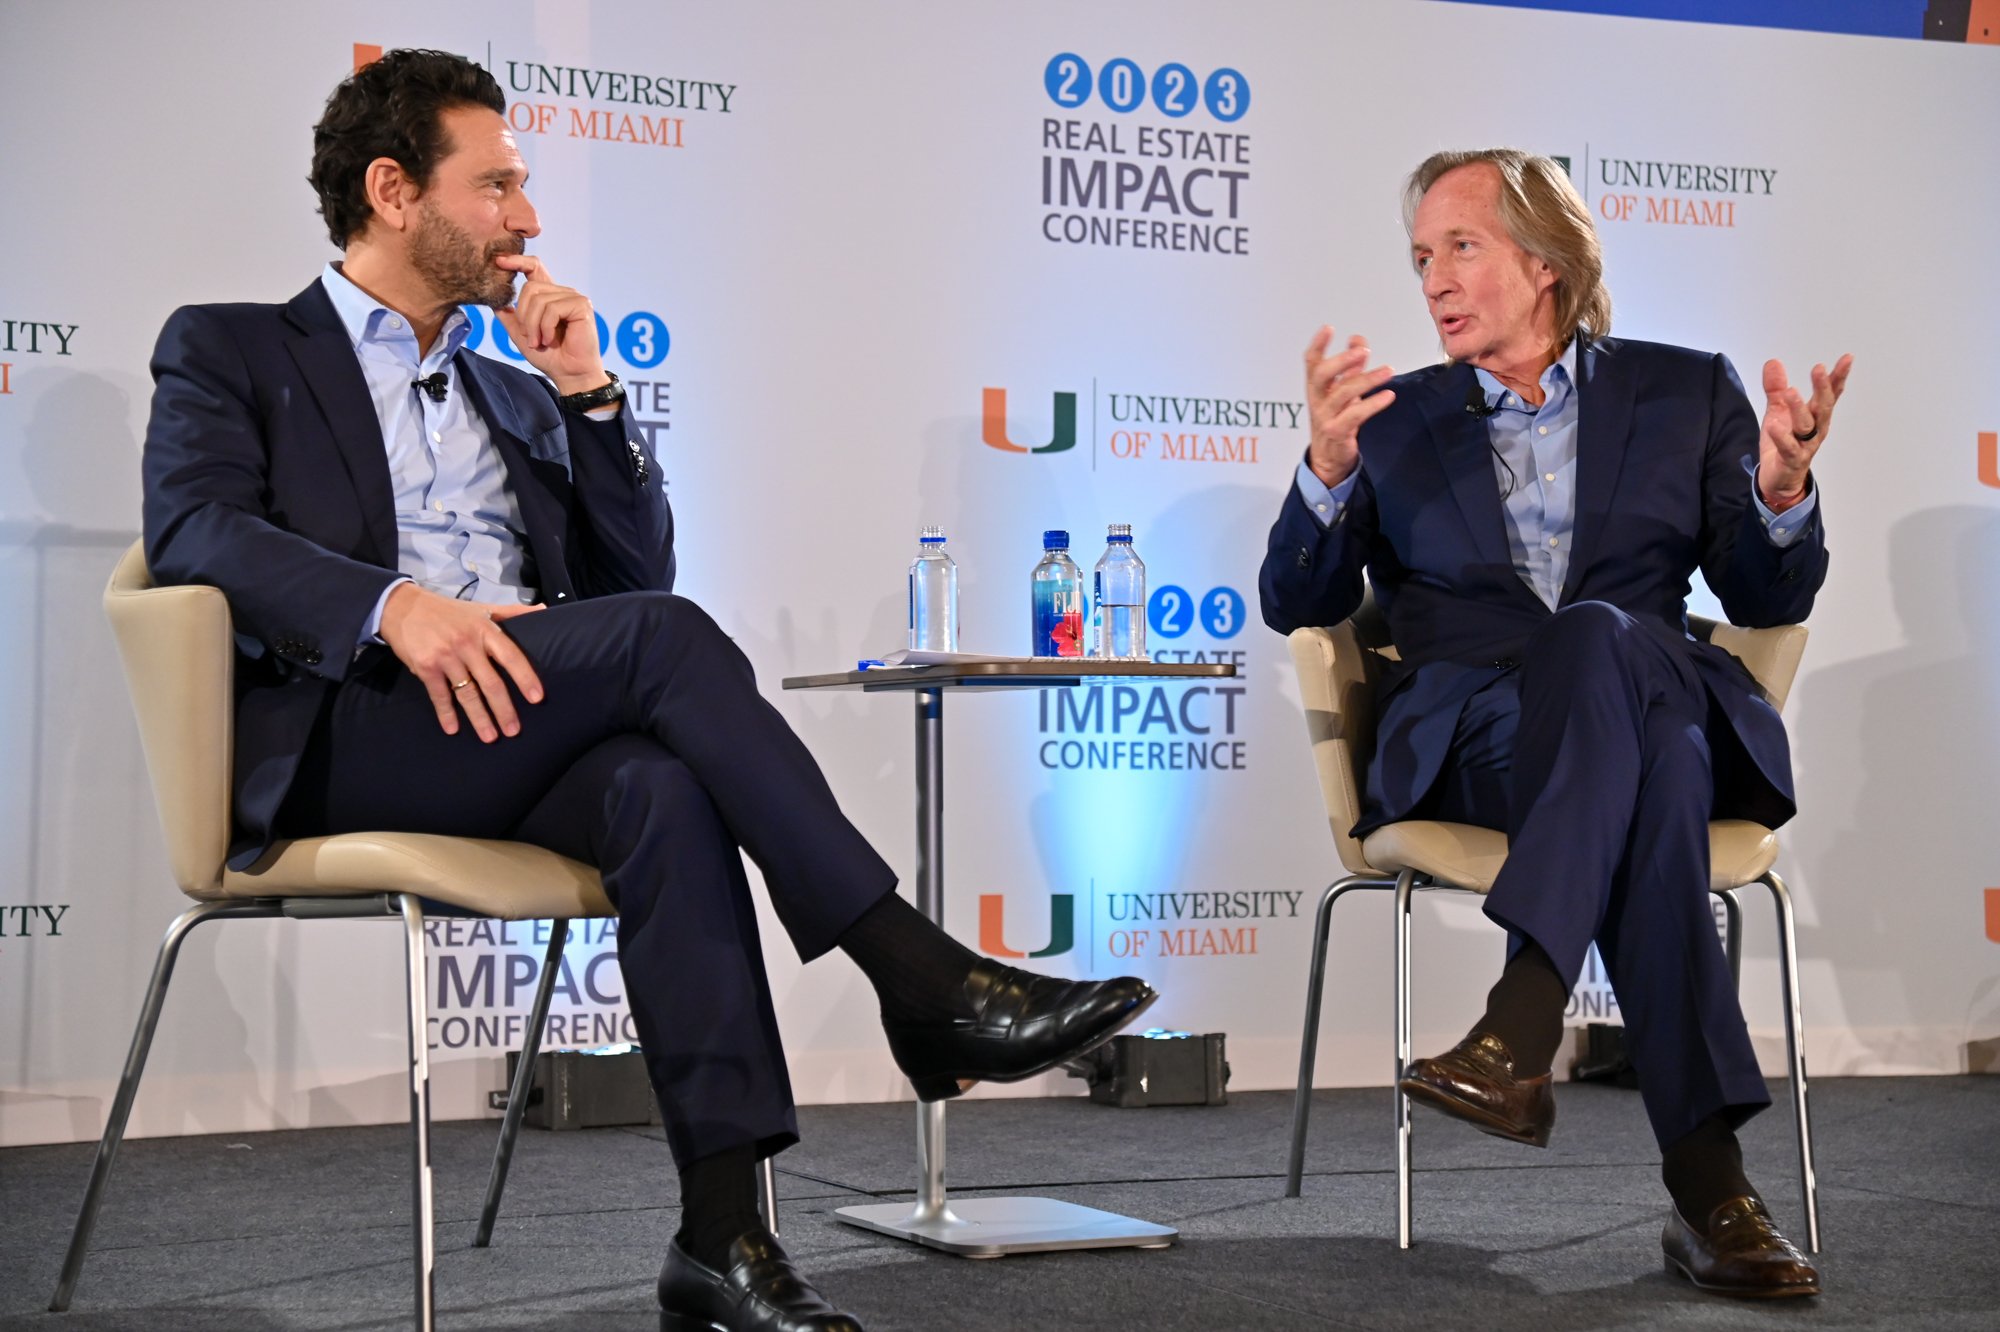 University of Miami Real Estate Impact Conference 2023 The Largest Edition Yet As Real Estate Leaders Discuss The State of Miami Real Estate 993.jpg